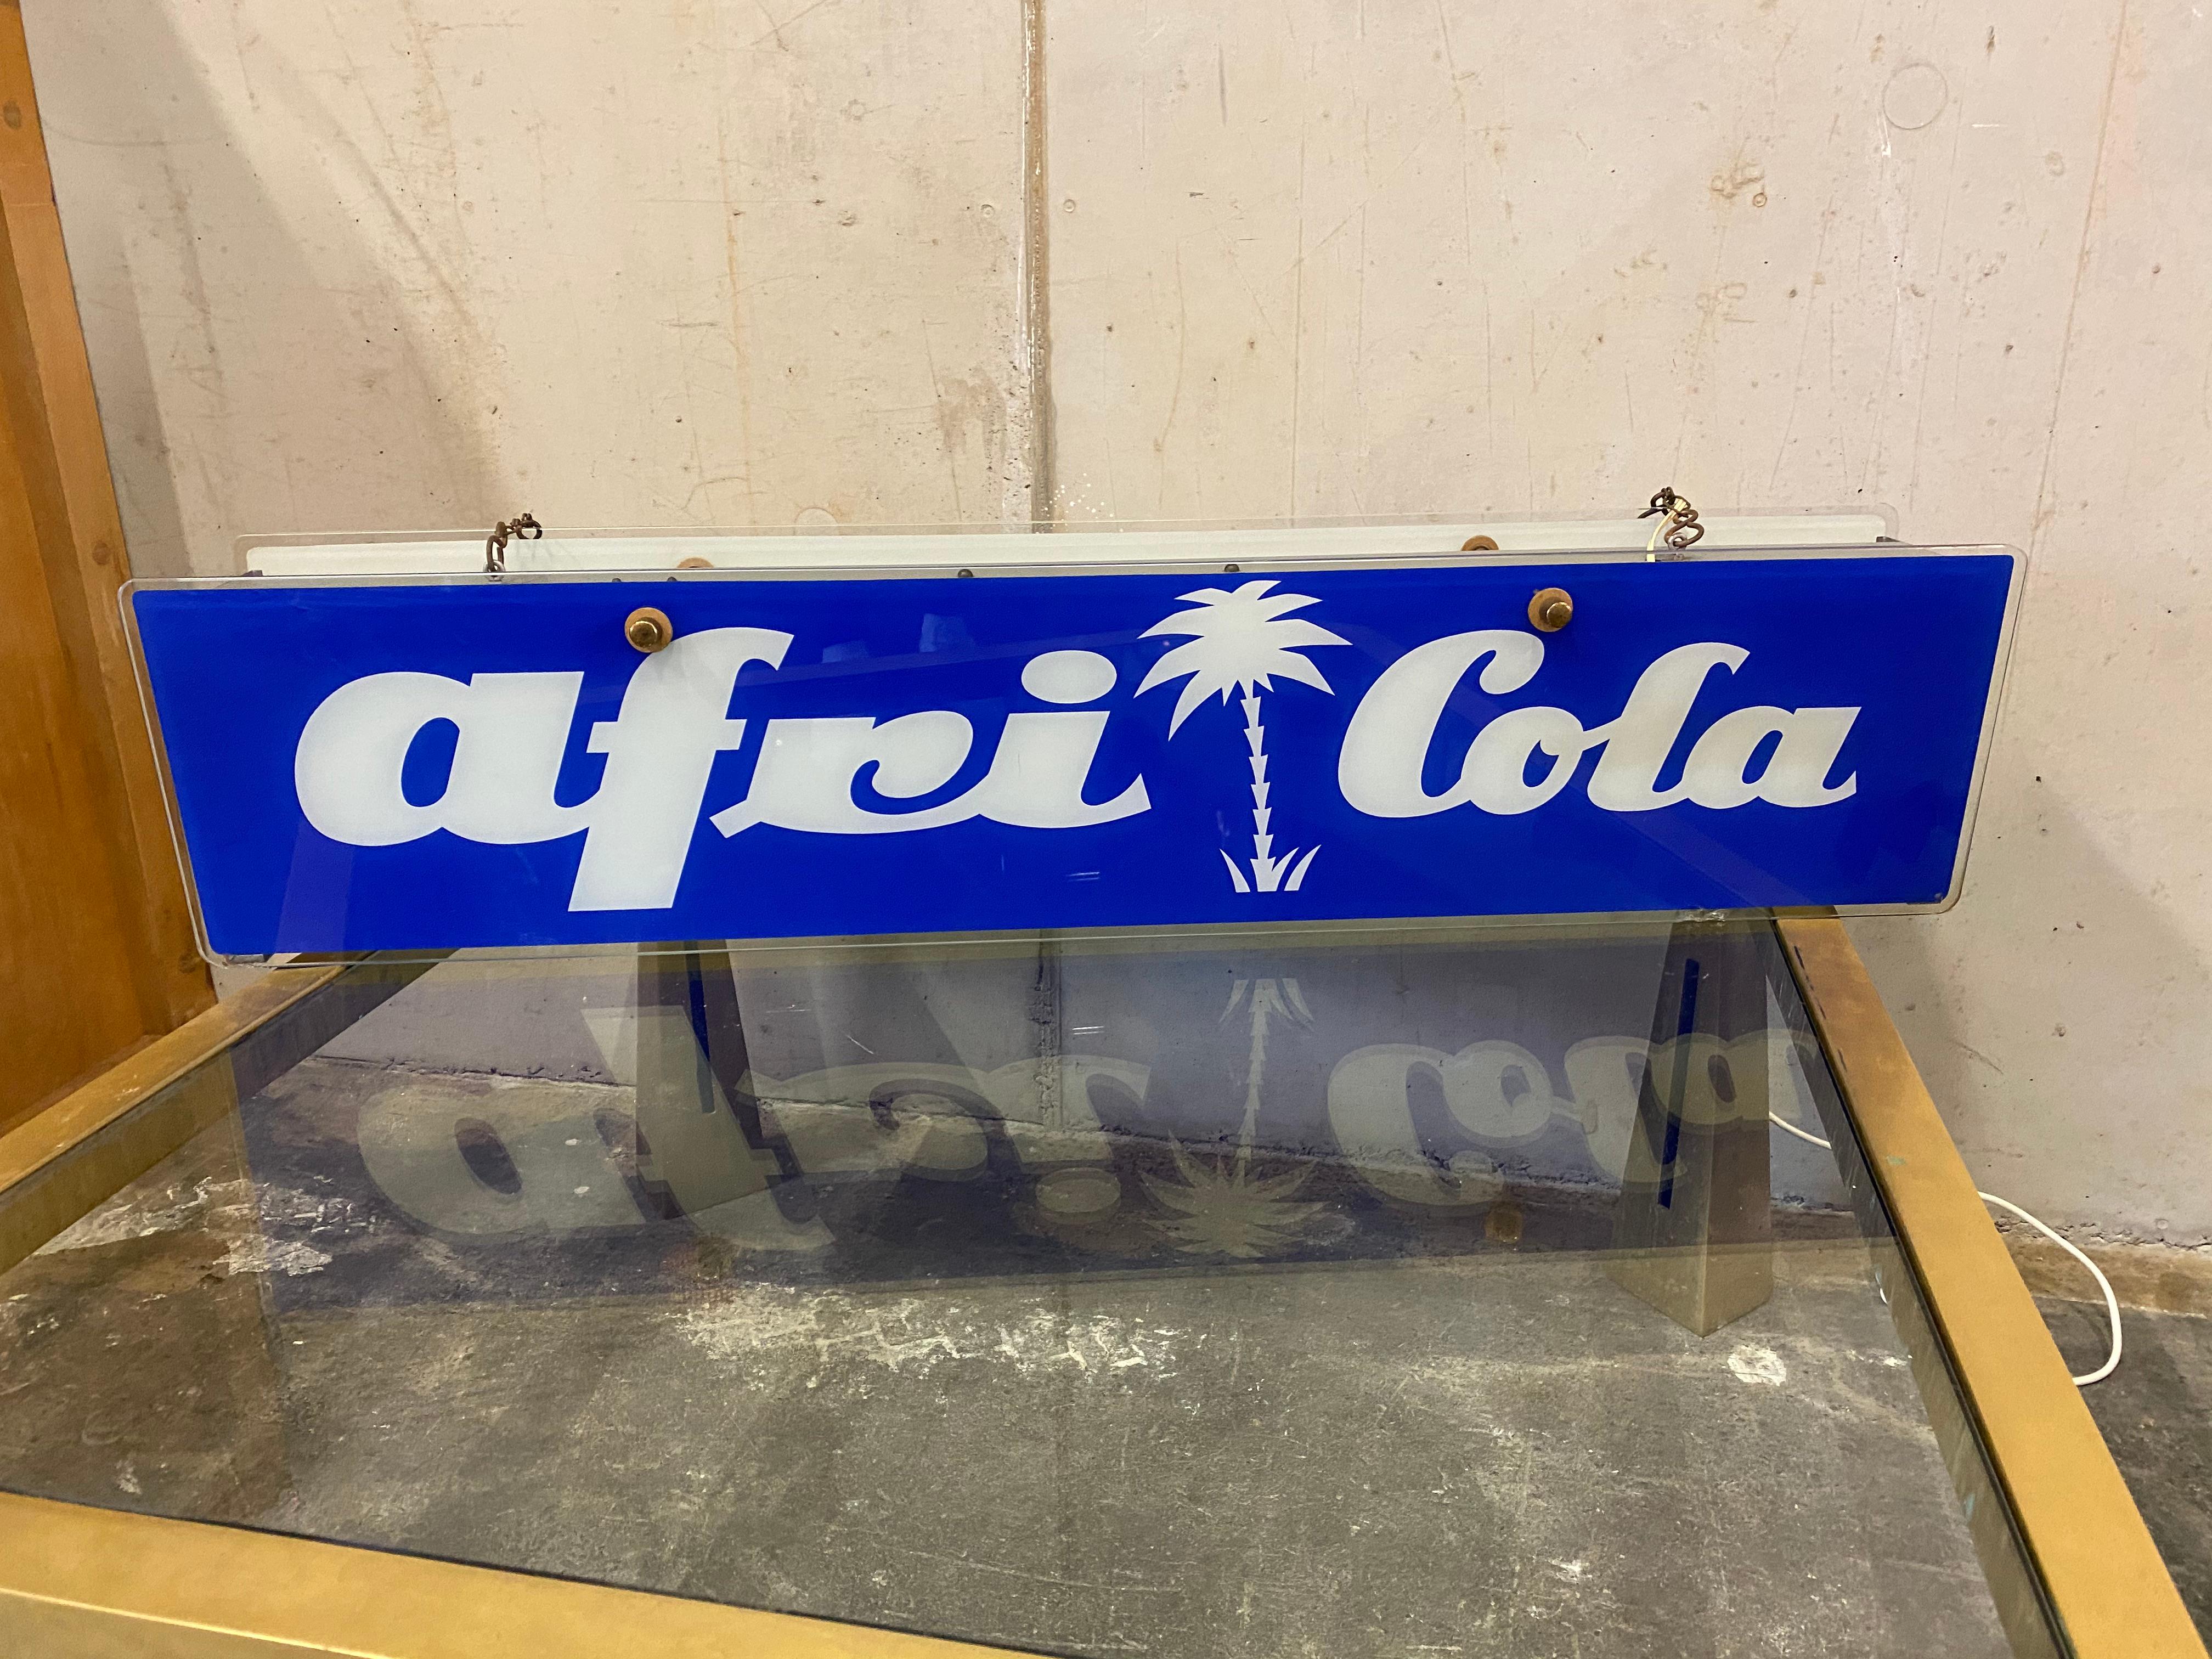 Afri Cola neon sign made of glass and for hanging from the 1950s. Shown is still the old original brand design in blue and white. 
The special feature of this illuminated sign is probably the fact that it is made of glass on the one hand and that